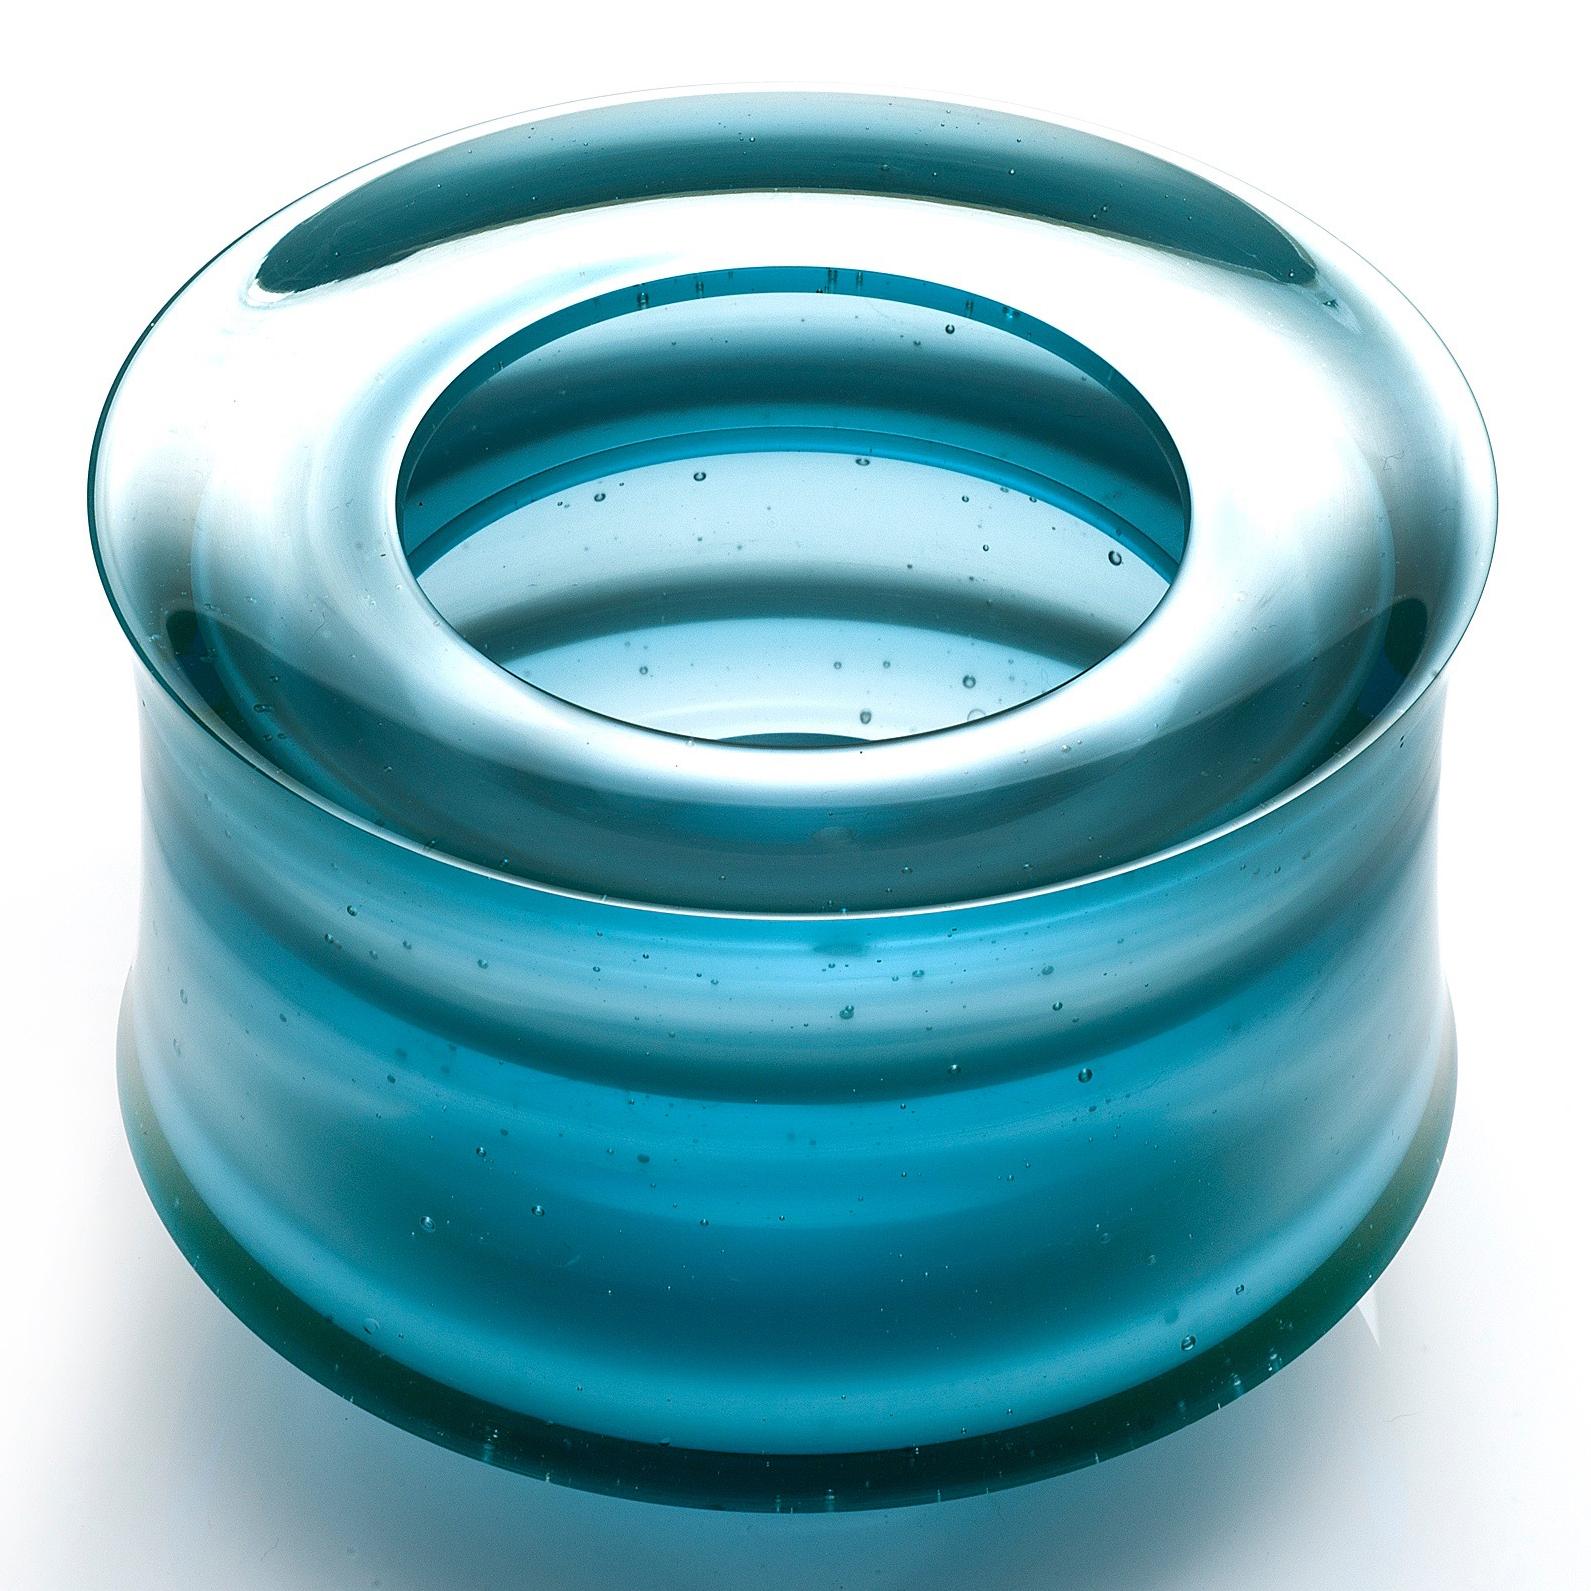 Contemporary Corymb, a Unique Aqua/Turquoise Glass Art Work and Centrepiece by Paul Stopler